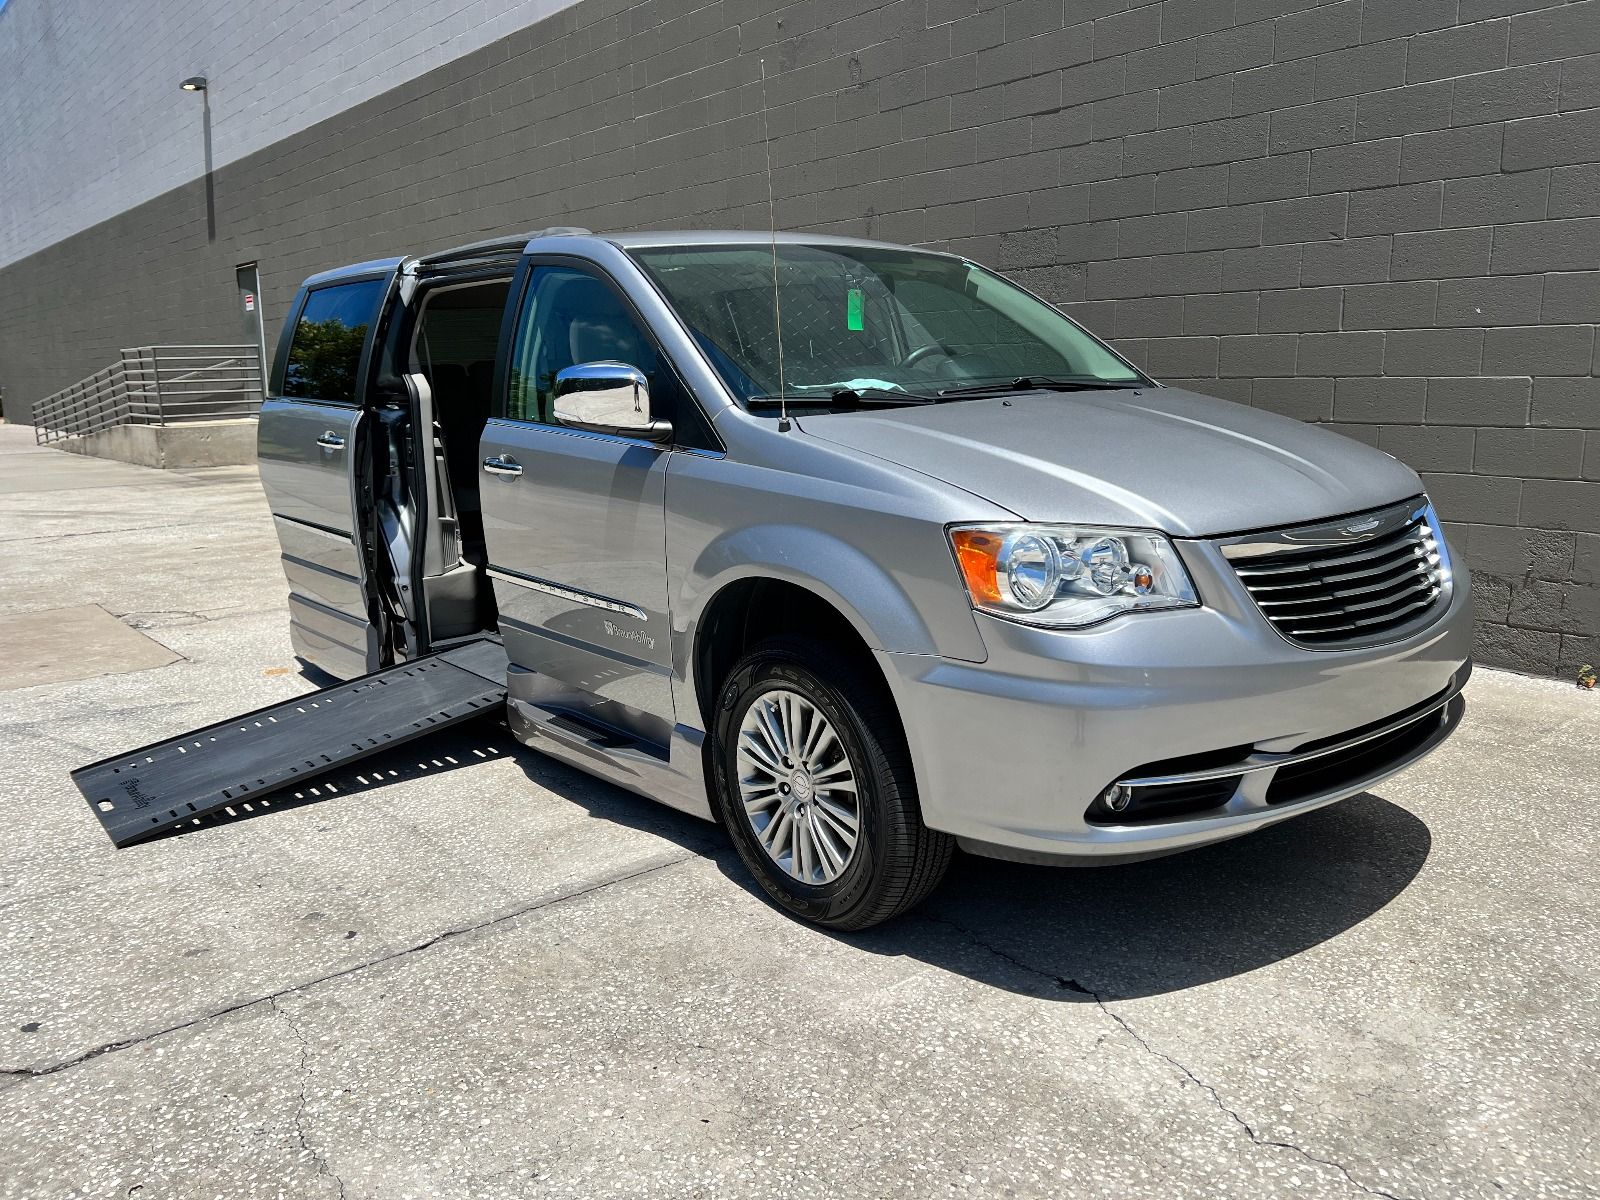 Silver 2016 Chrysler Town & Country wheelchair van with ramp deployed from passenger sliding door, as seen from front passenger angle.